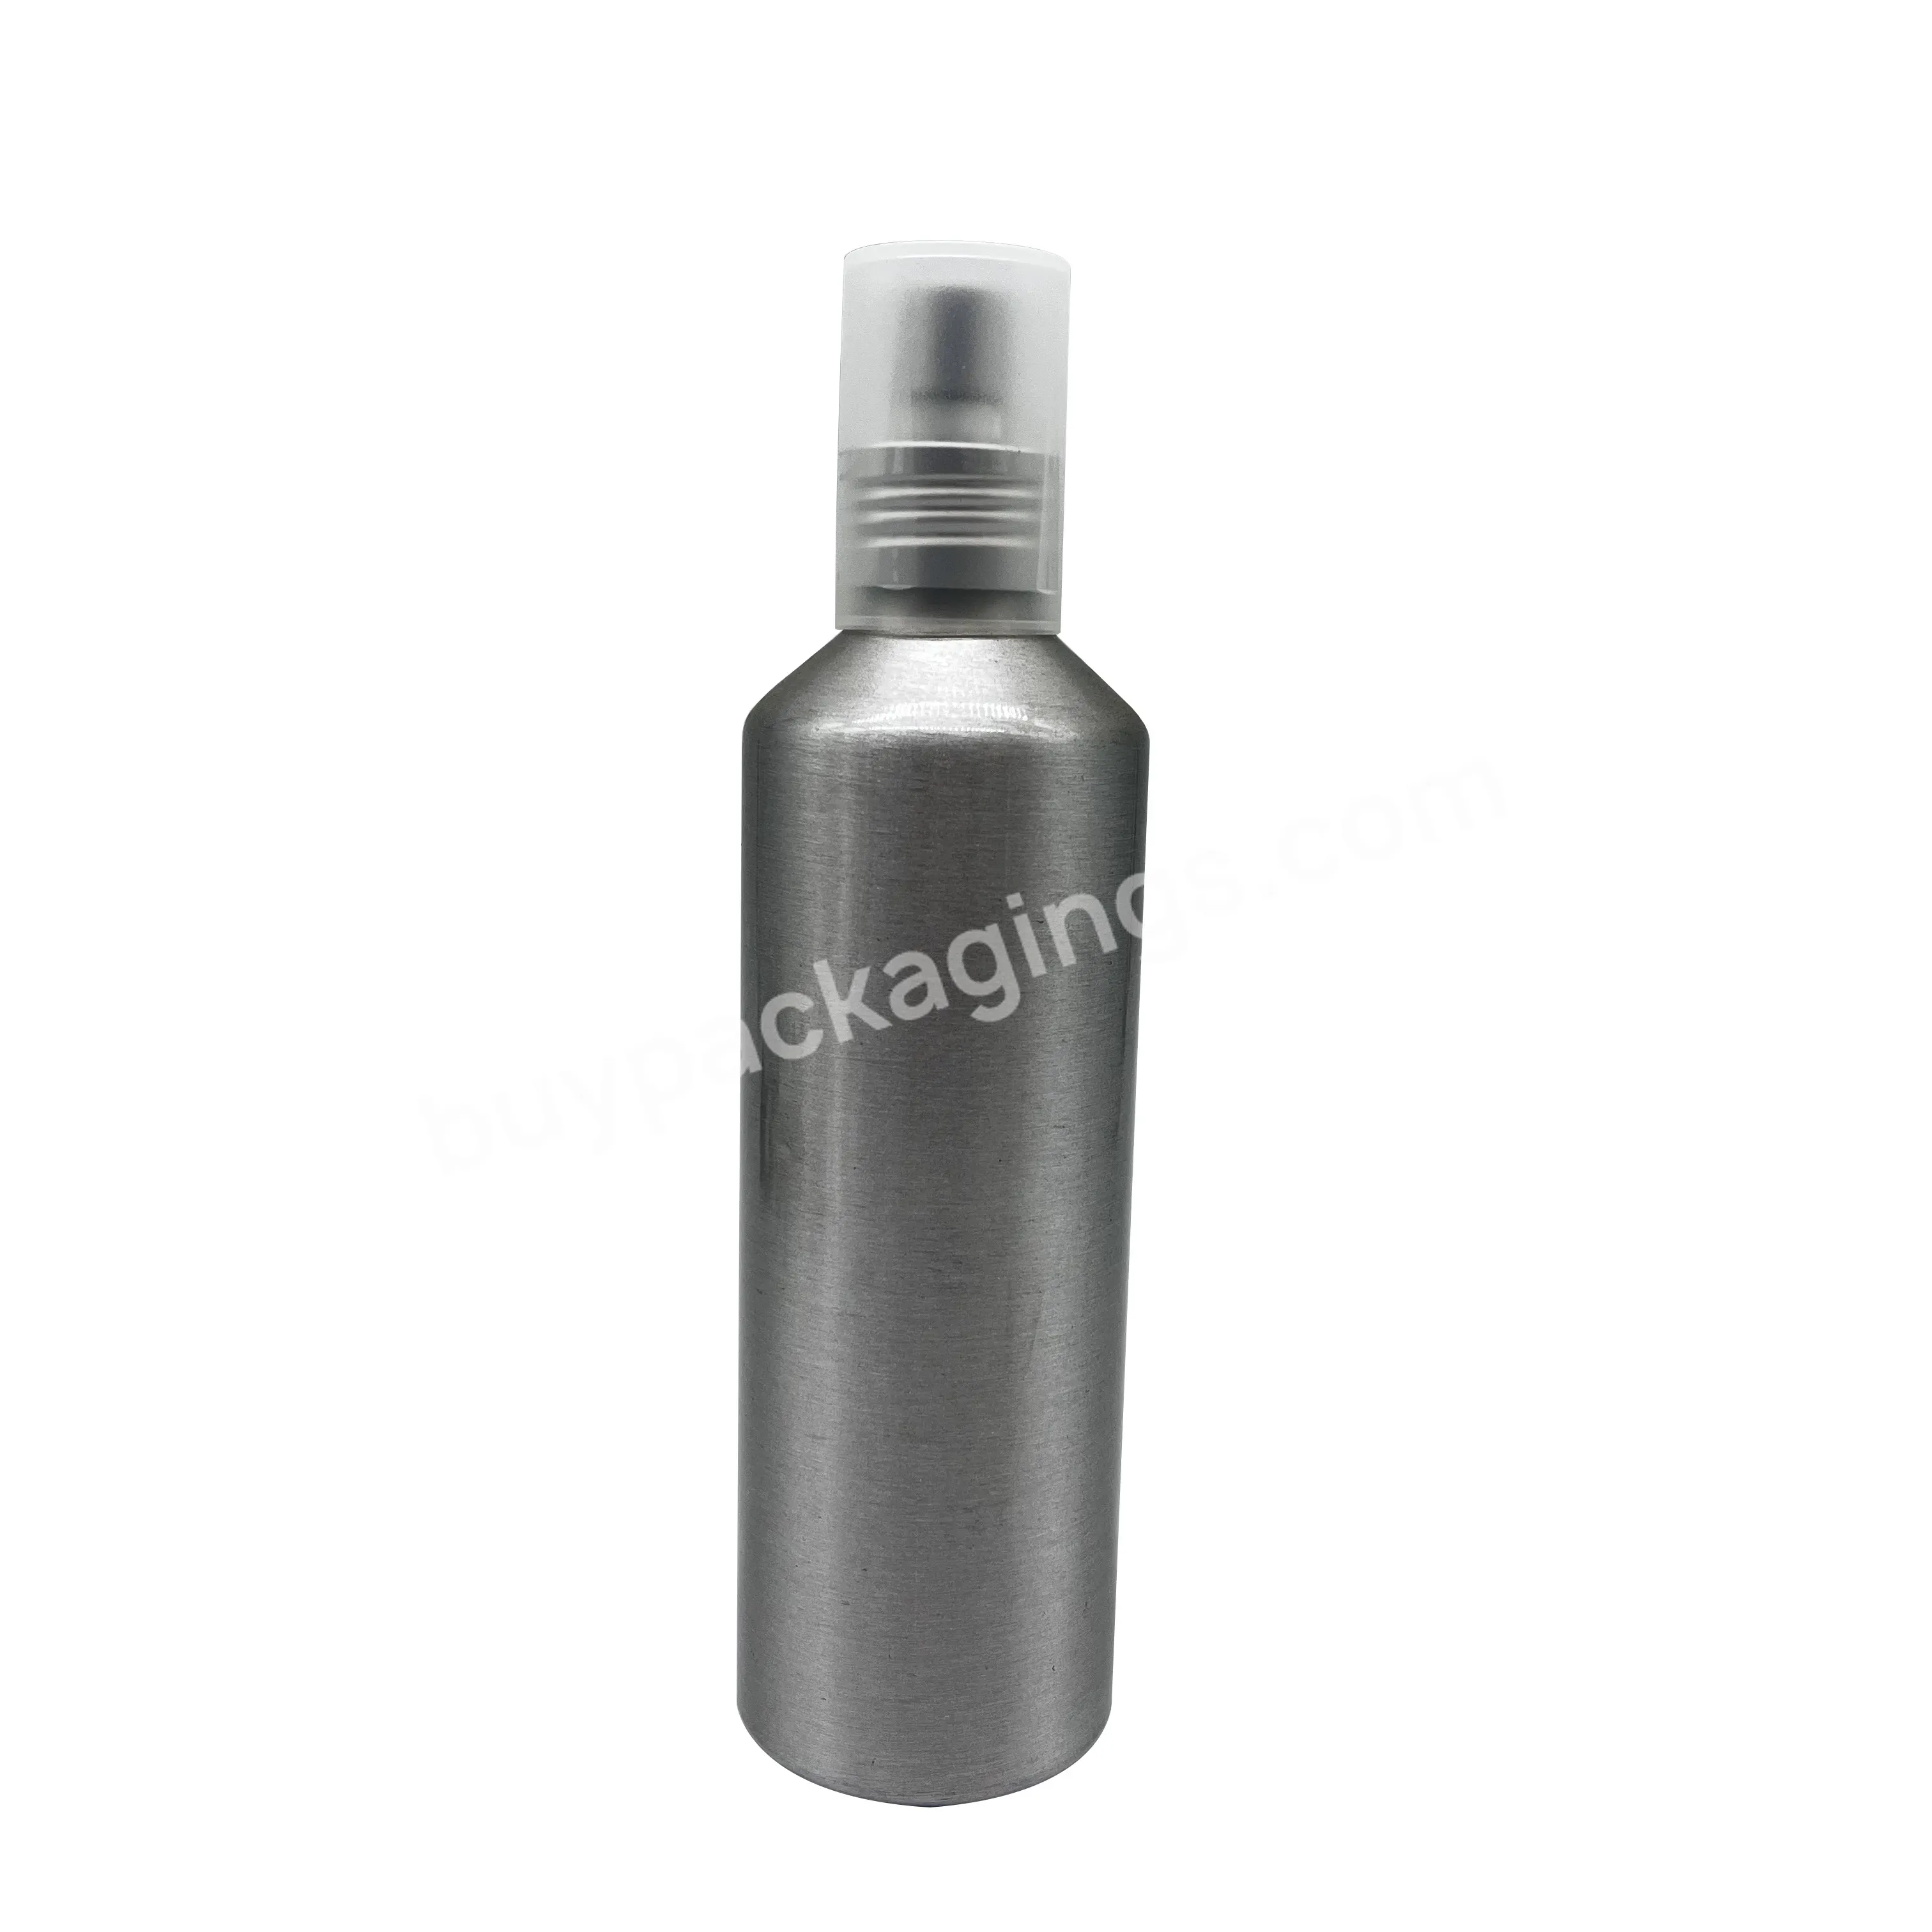 Wholesale 24mm Thread Silver Collar Fine Mist Sprayer Top With Clip Lock And Big Frosting Full Cover Cap - Buy High Quality Wholesale 24mm Silver Mist Sprayer,Thread Mist Sprayer With Big Cover,Mist Sprayer For Aluminum Bottle.